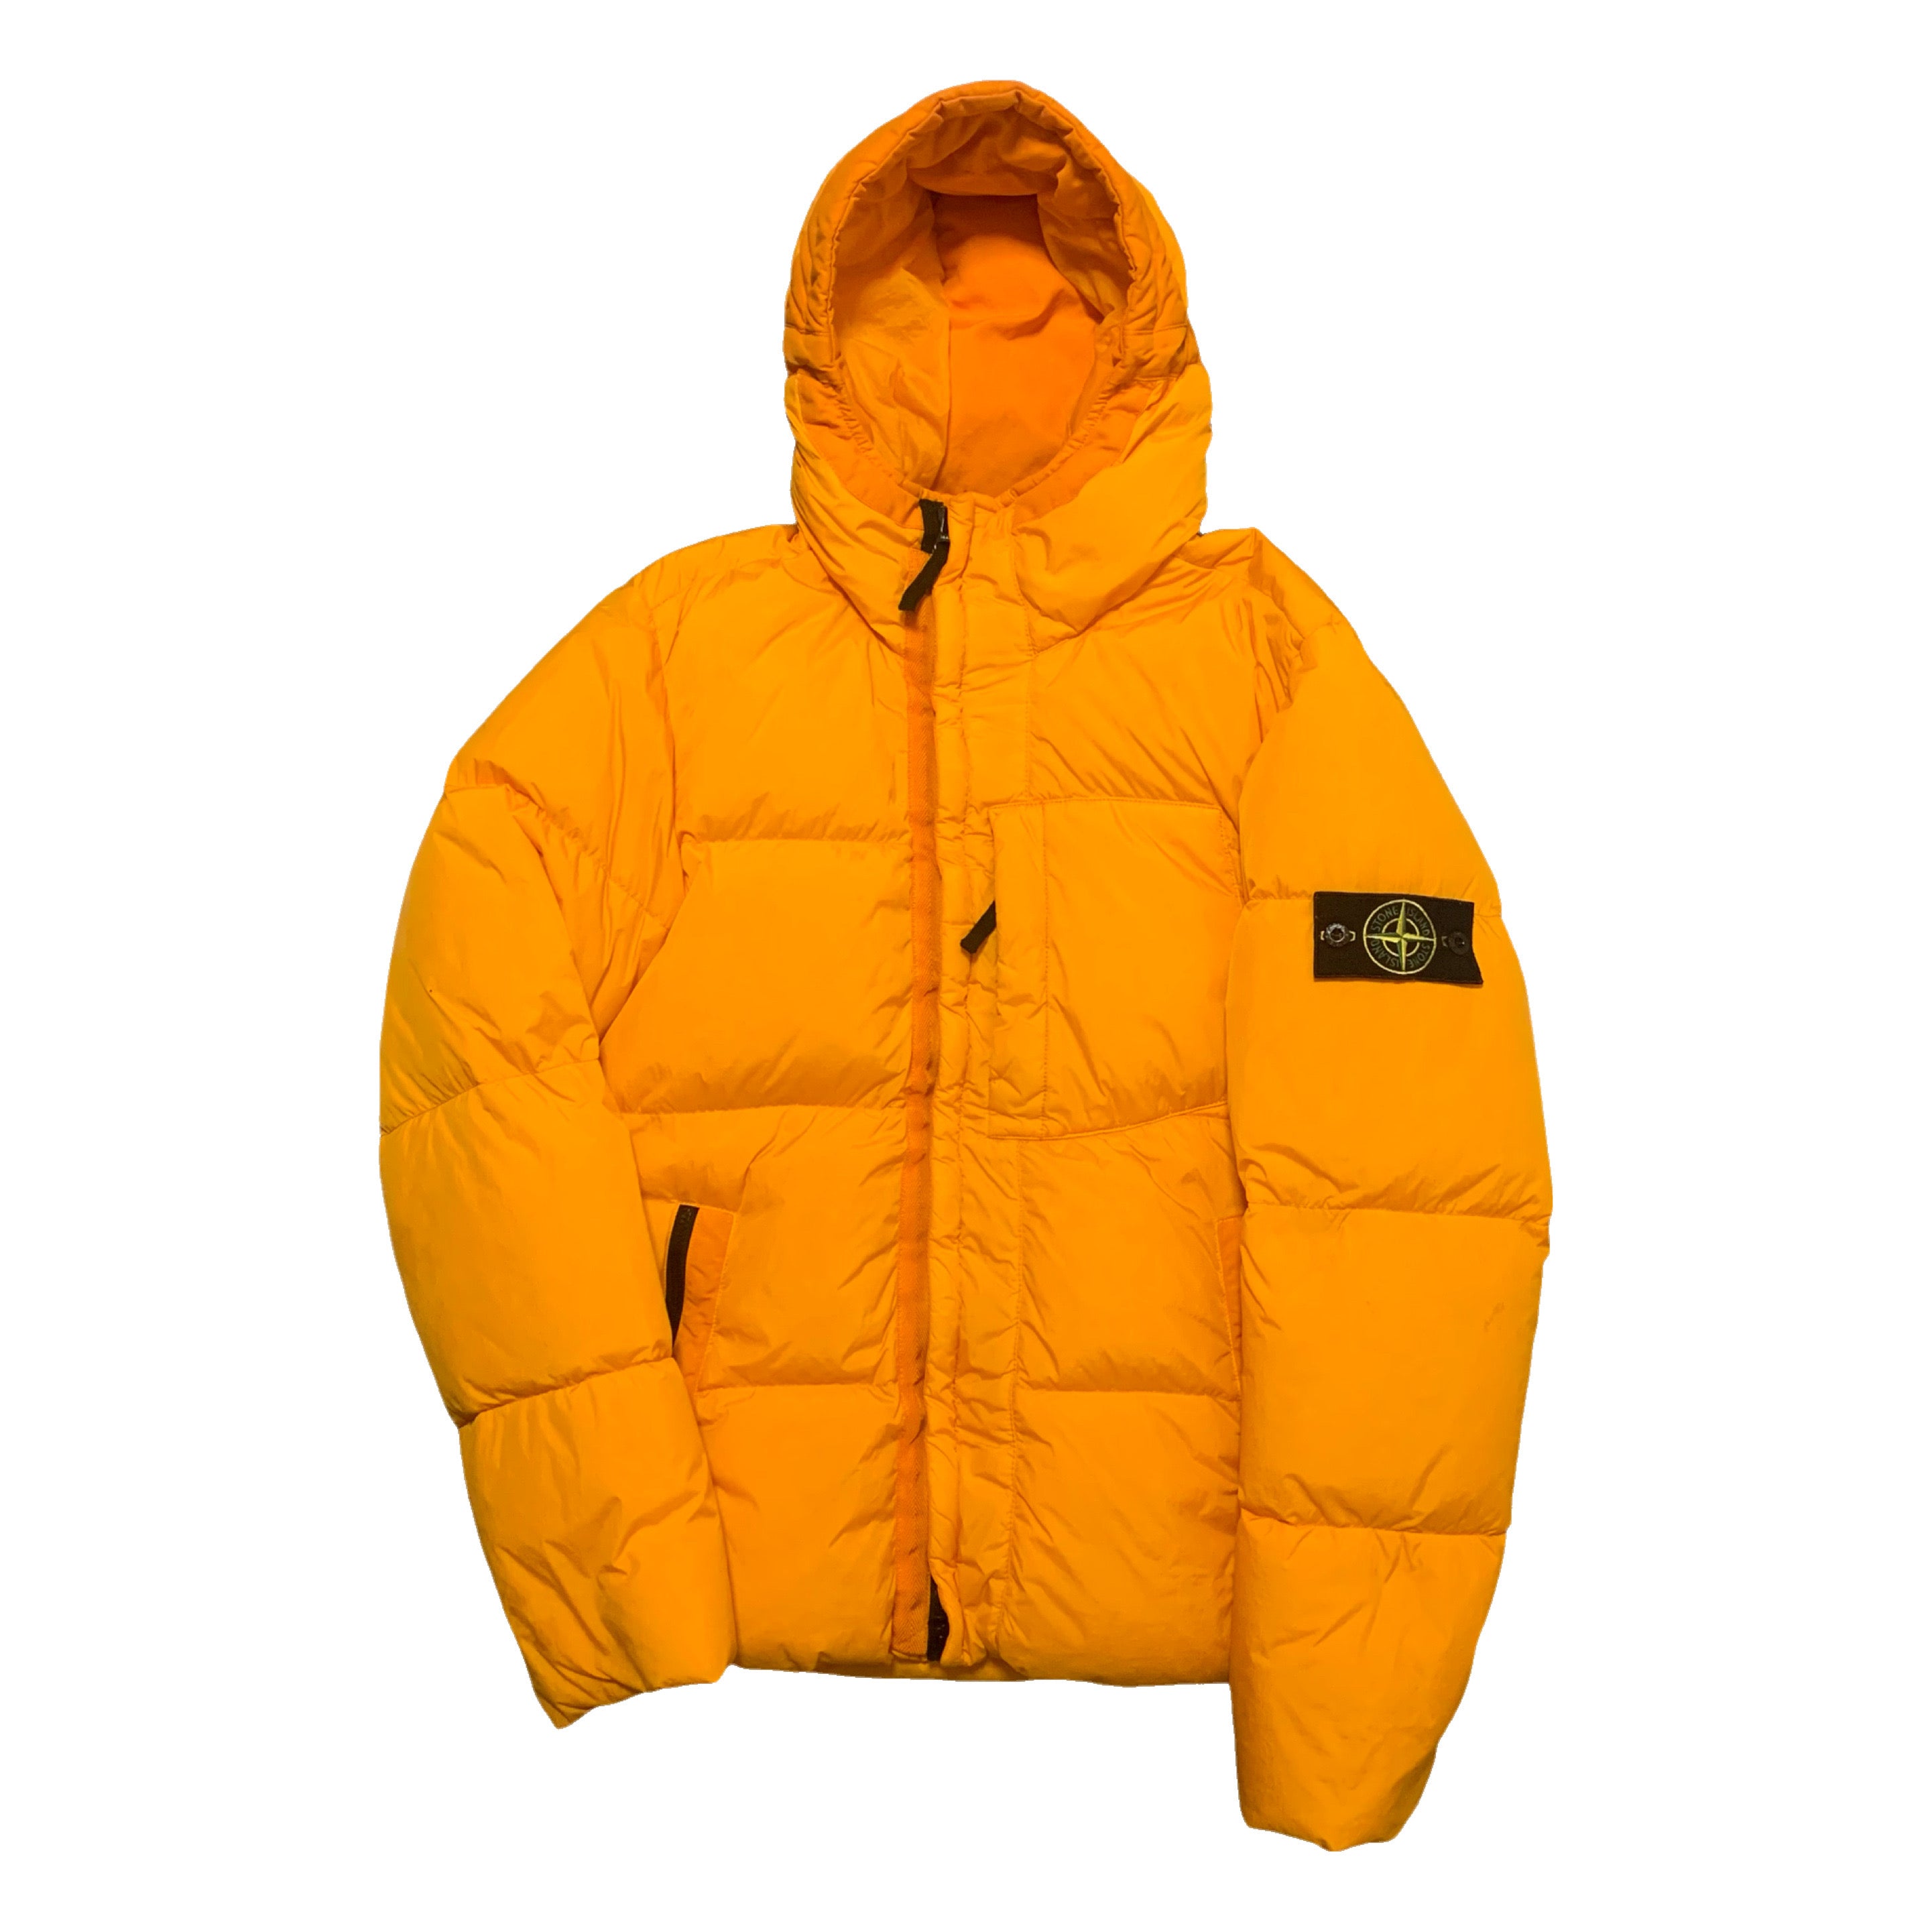 Stone Island Small Orange Garment Dyed Crinkle Reps Hooded Down Jacket 2017